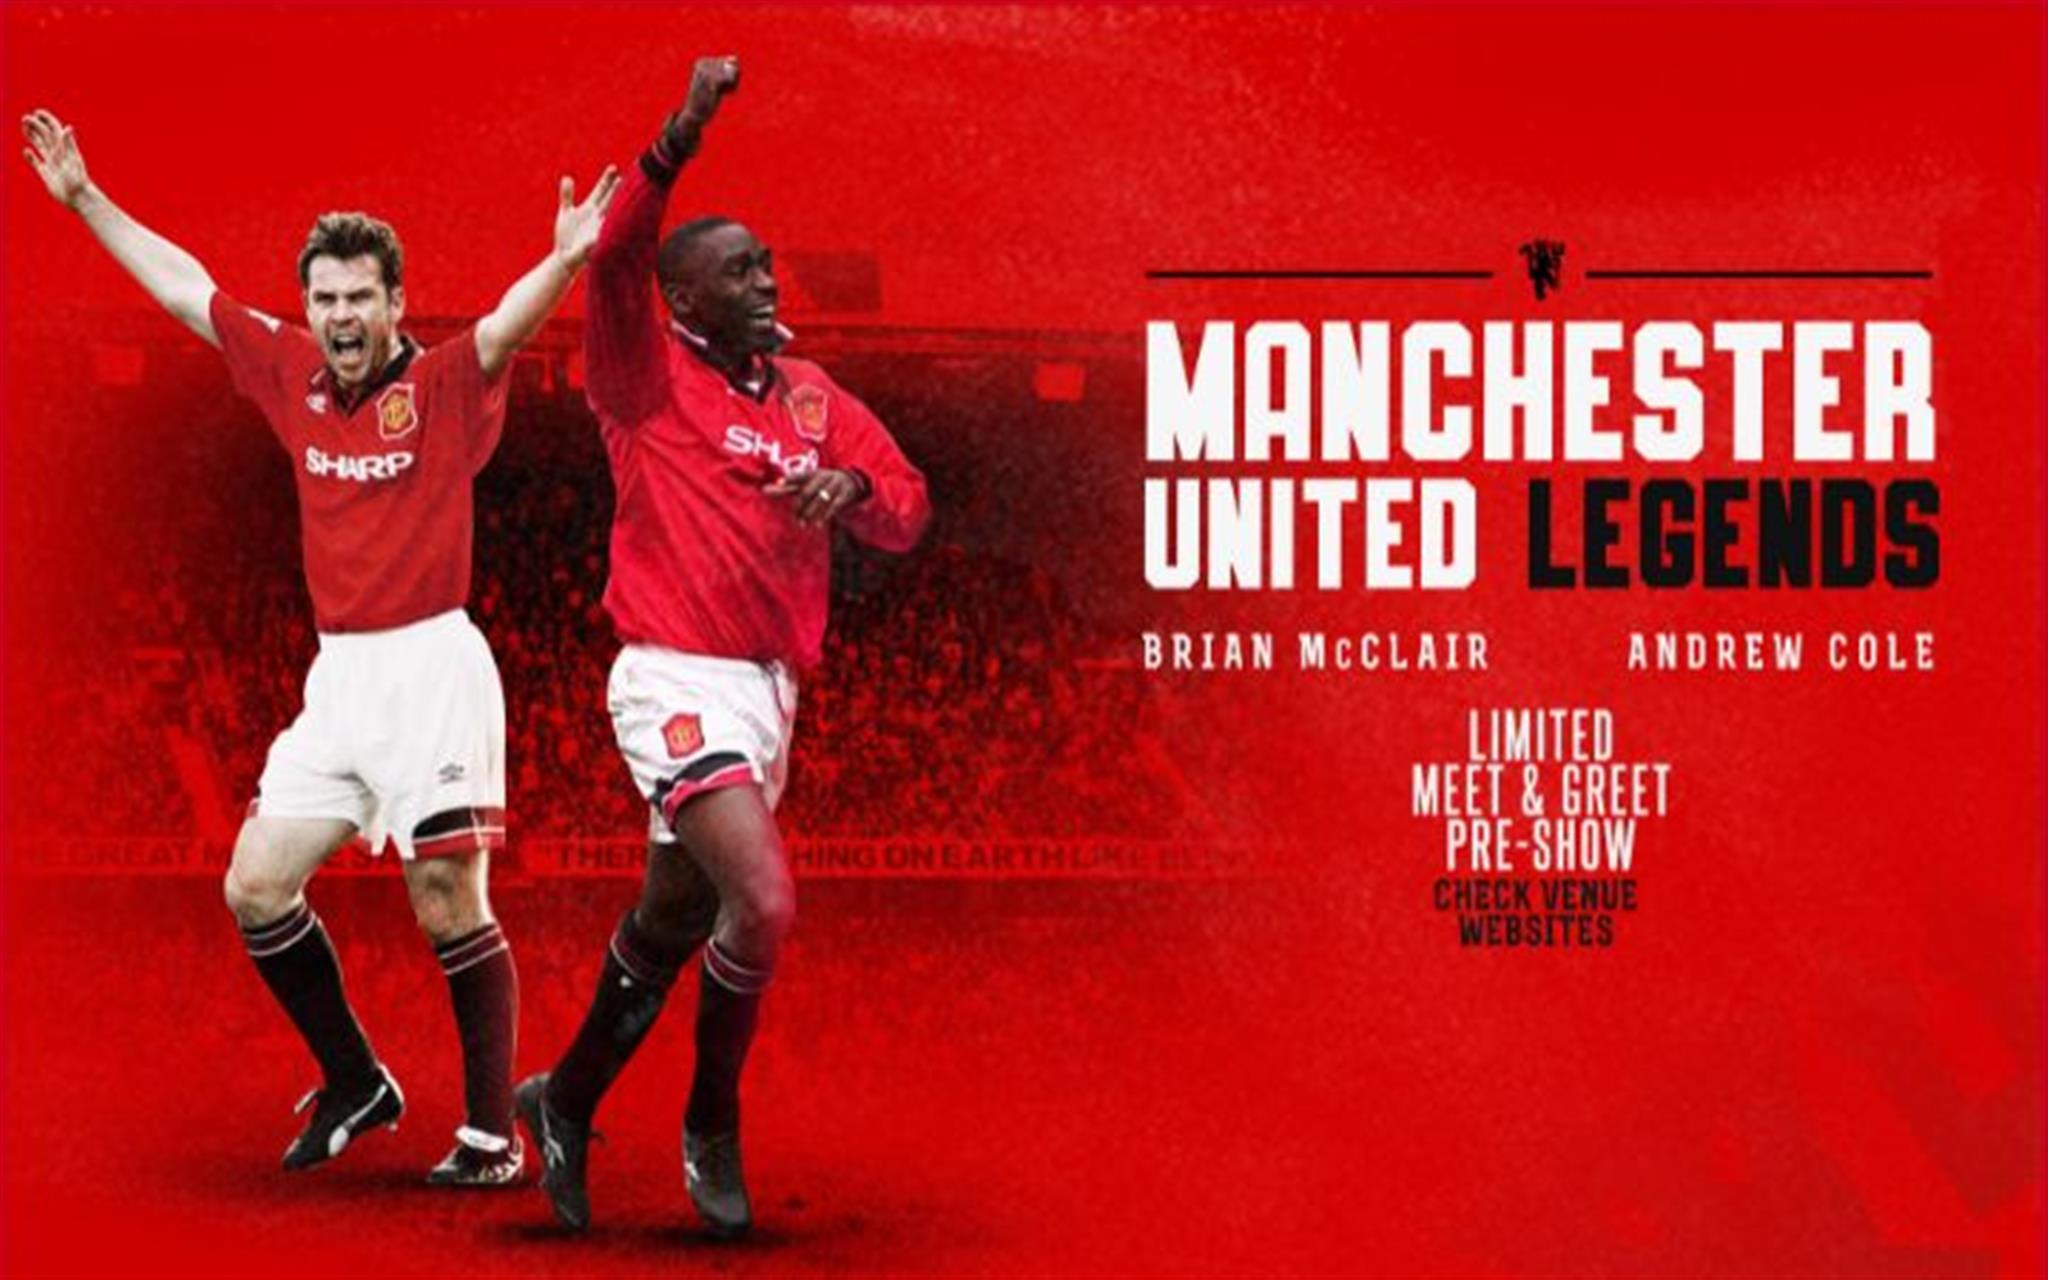 An Audience With Manchester Utd Legends